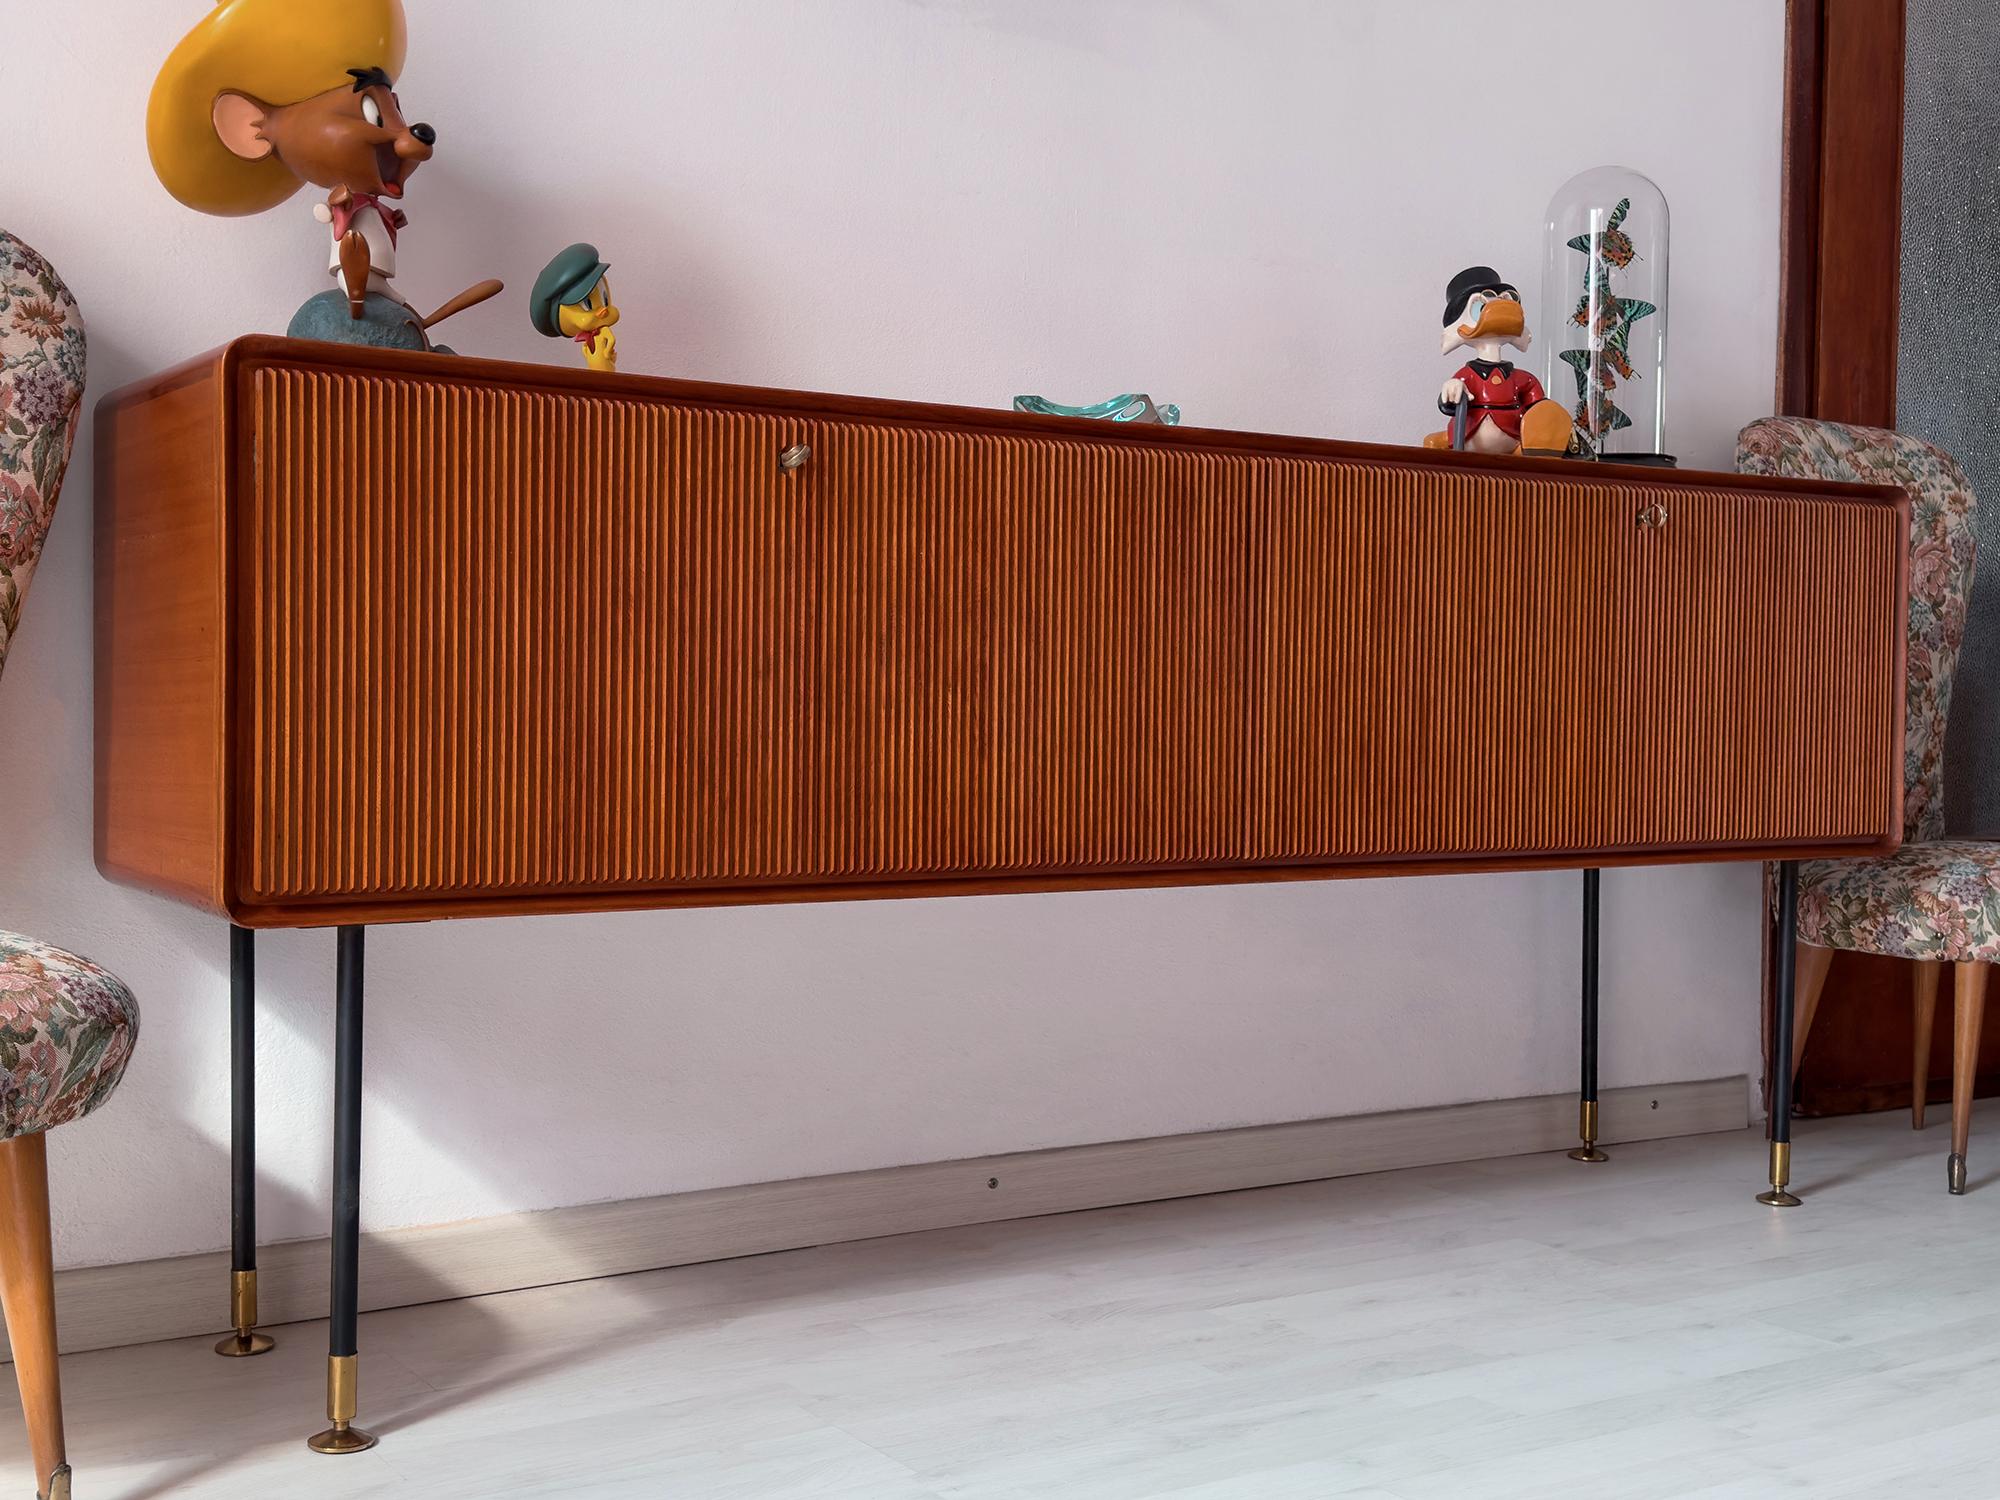 This magnificent Italian Sideboard in teak wood is a stunning example of the exceptional craftsmanship produced by the Consorzio Esposizione Mobili Cantù in the 1950s.
Founded in 1949, the consortium aimed to bring together the best of Canturina